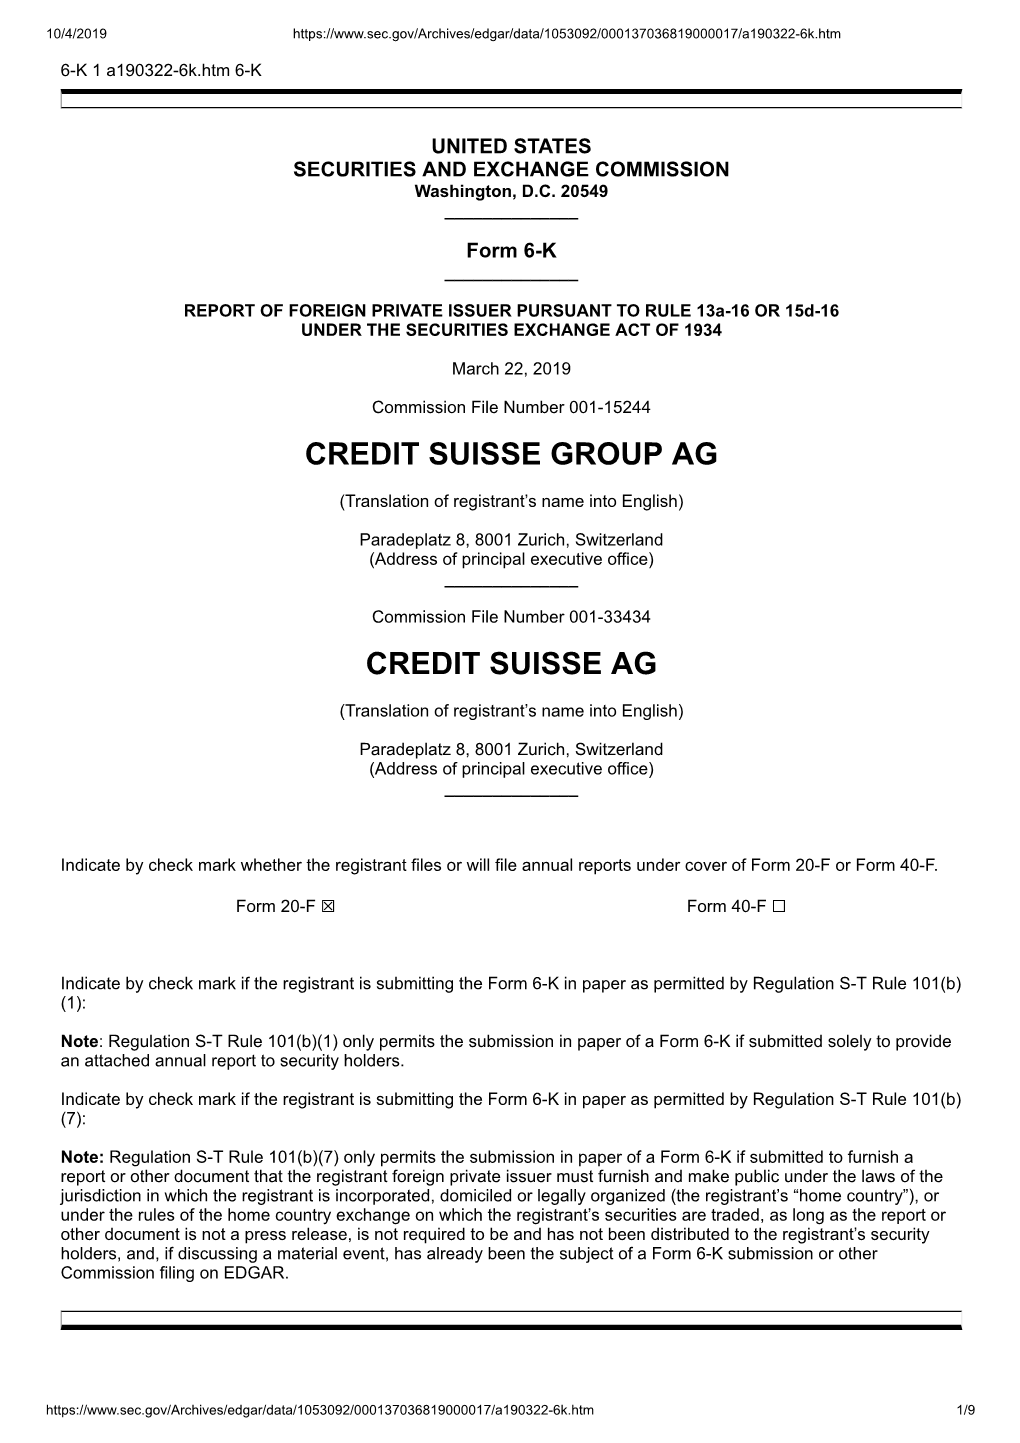 Credit Suisse Group Ag